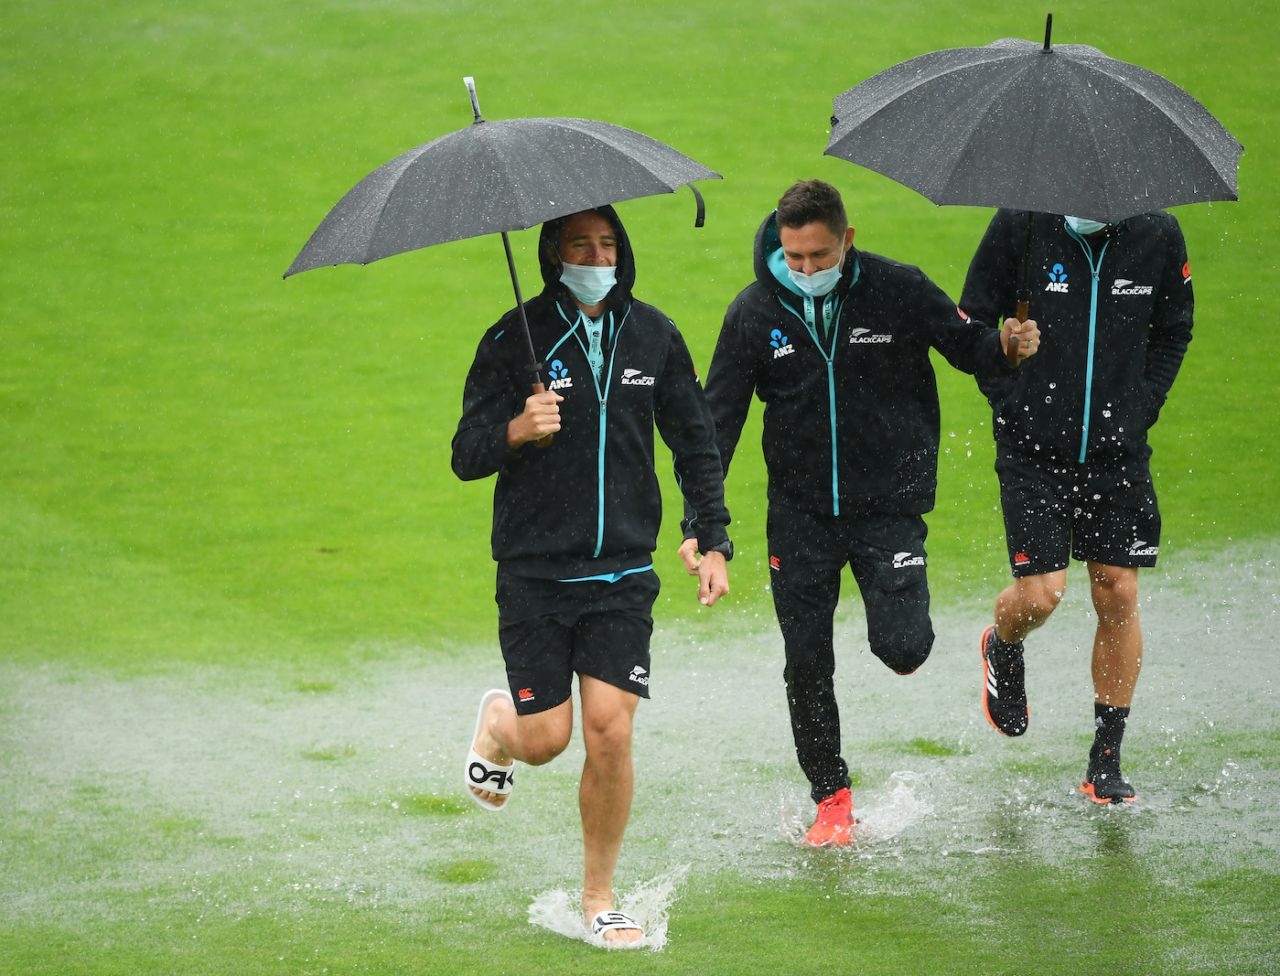 Tim Southee and Trent Boult have some fun in the rain, India vs New Zealand, WTC final, Southampton, 1st day, June 18, 2021